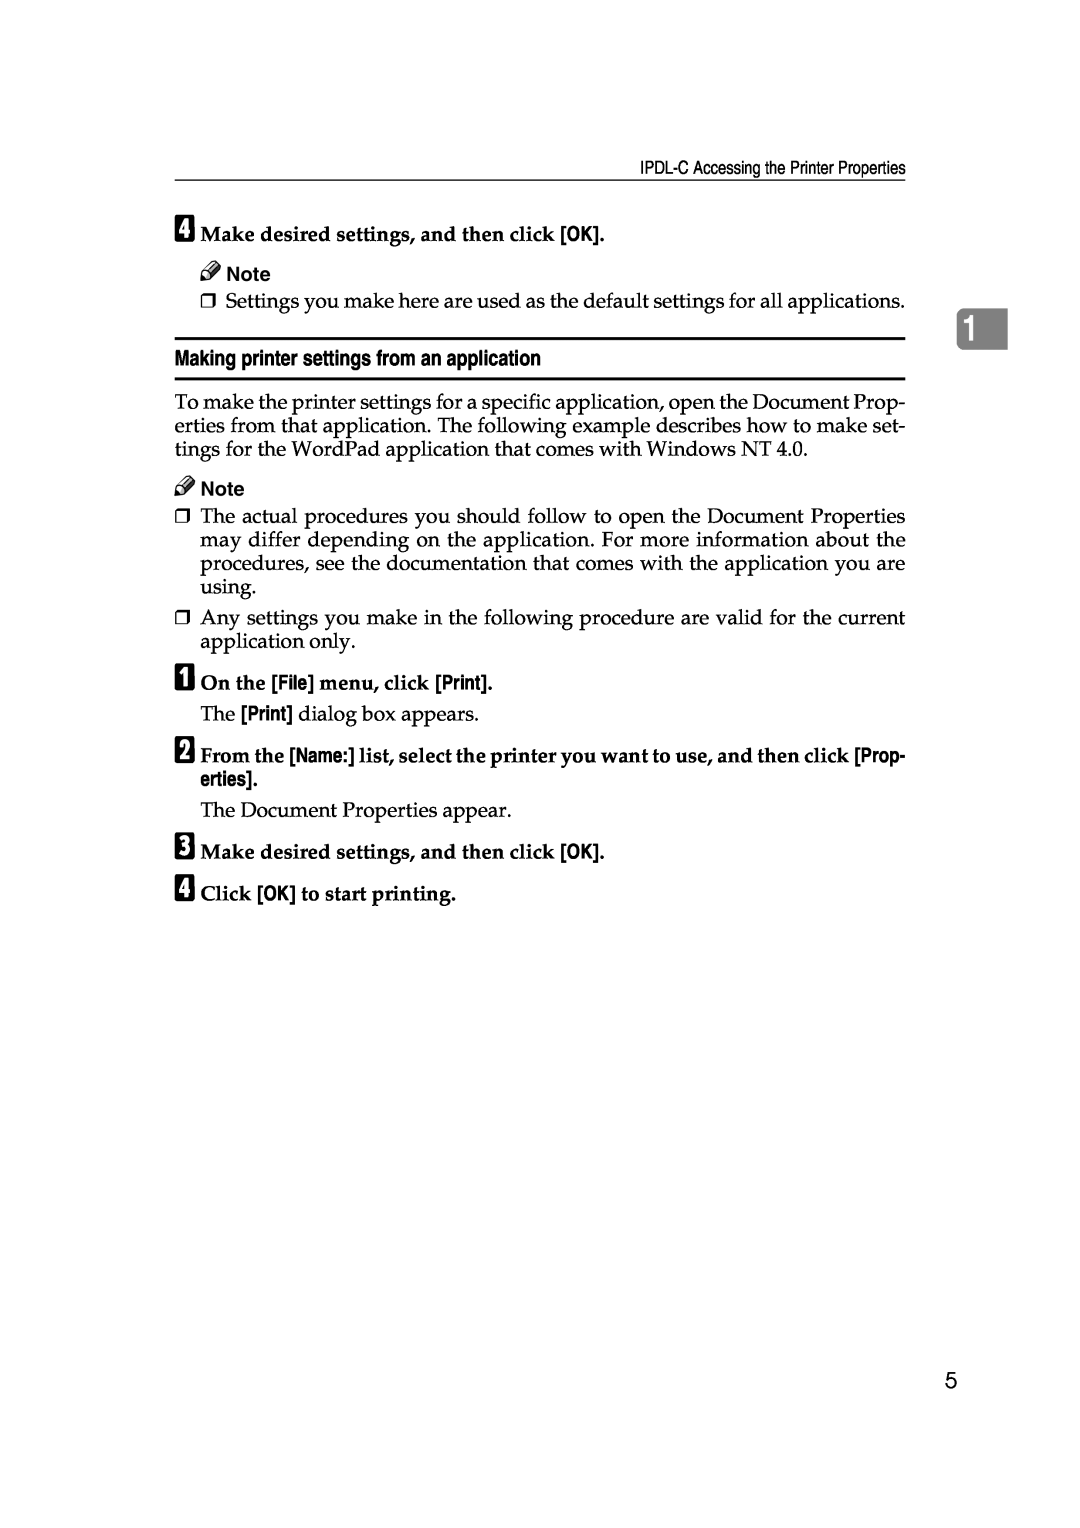 Lanier AP206 manual Making printer settings from an application, D Make desired settings, and then click OK 